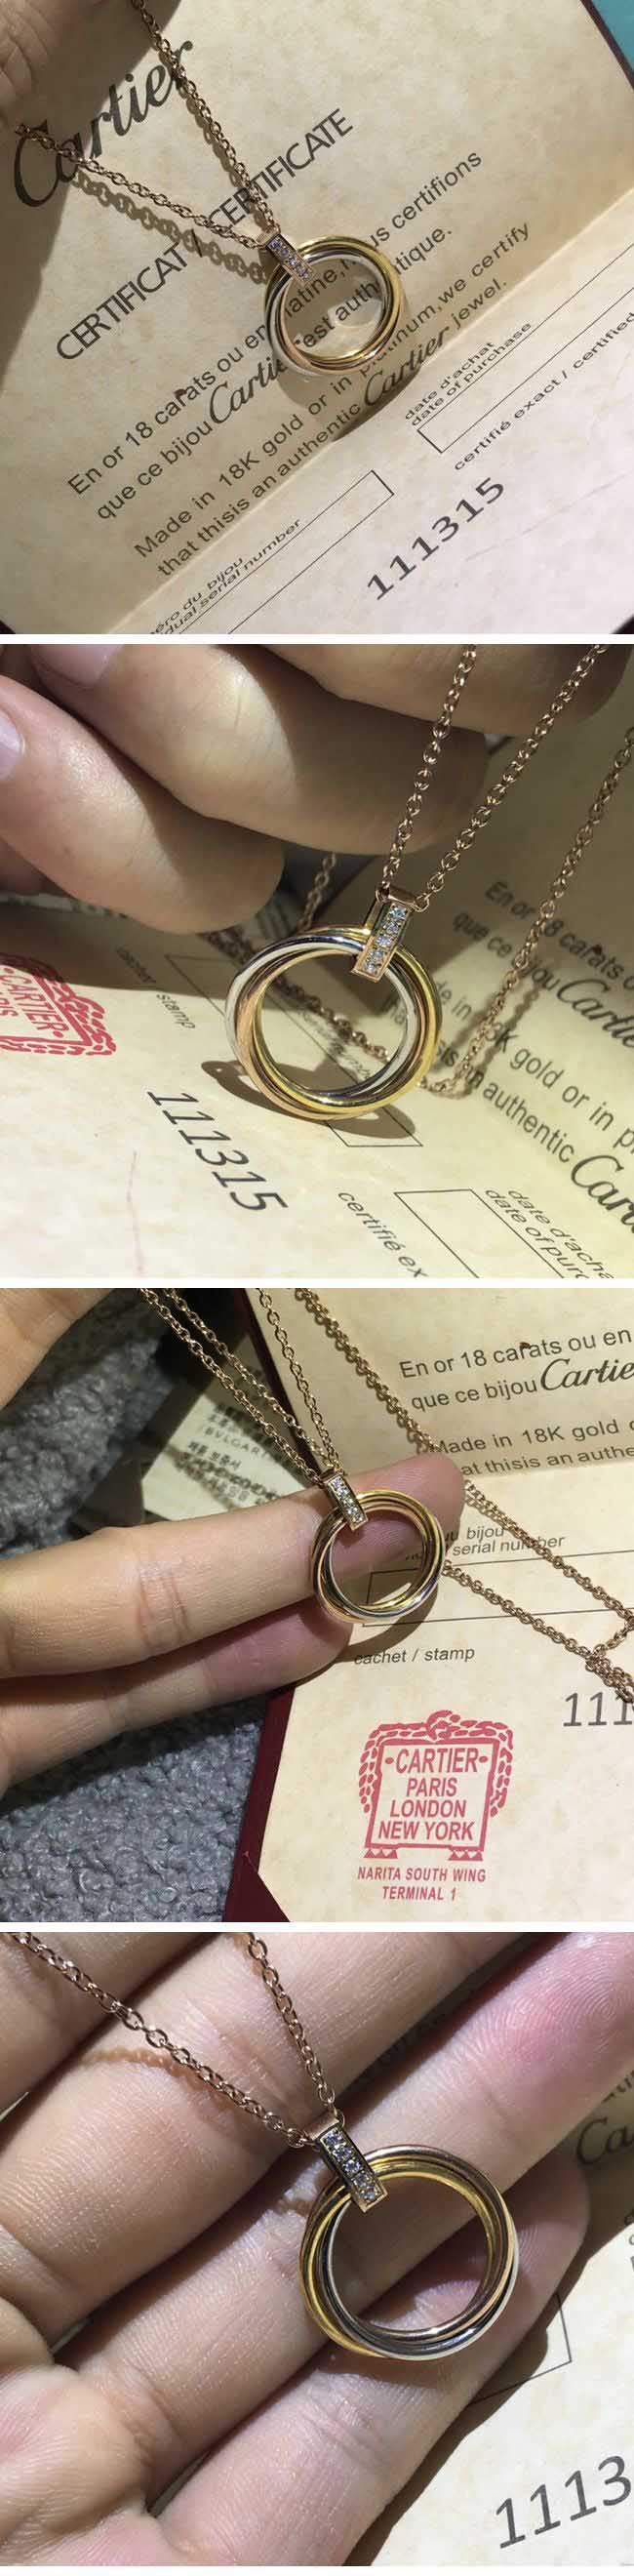 Cartier Trinity Ring Necklace カルティエ トリニティー リング ネックレス